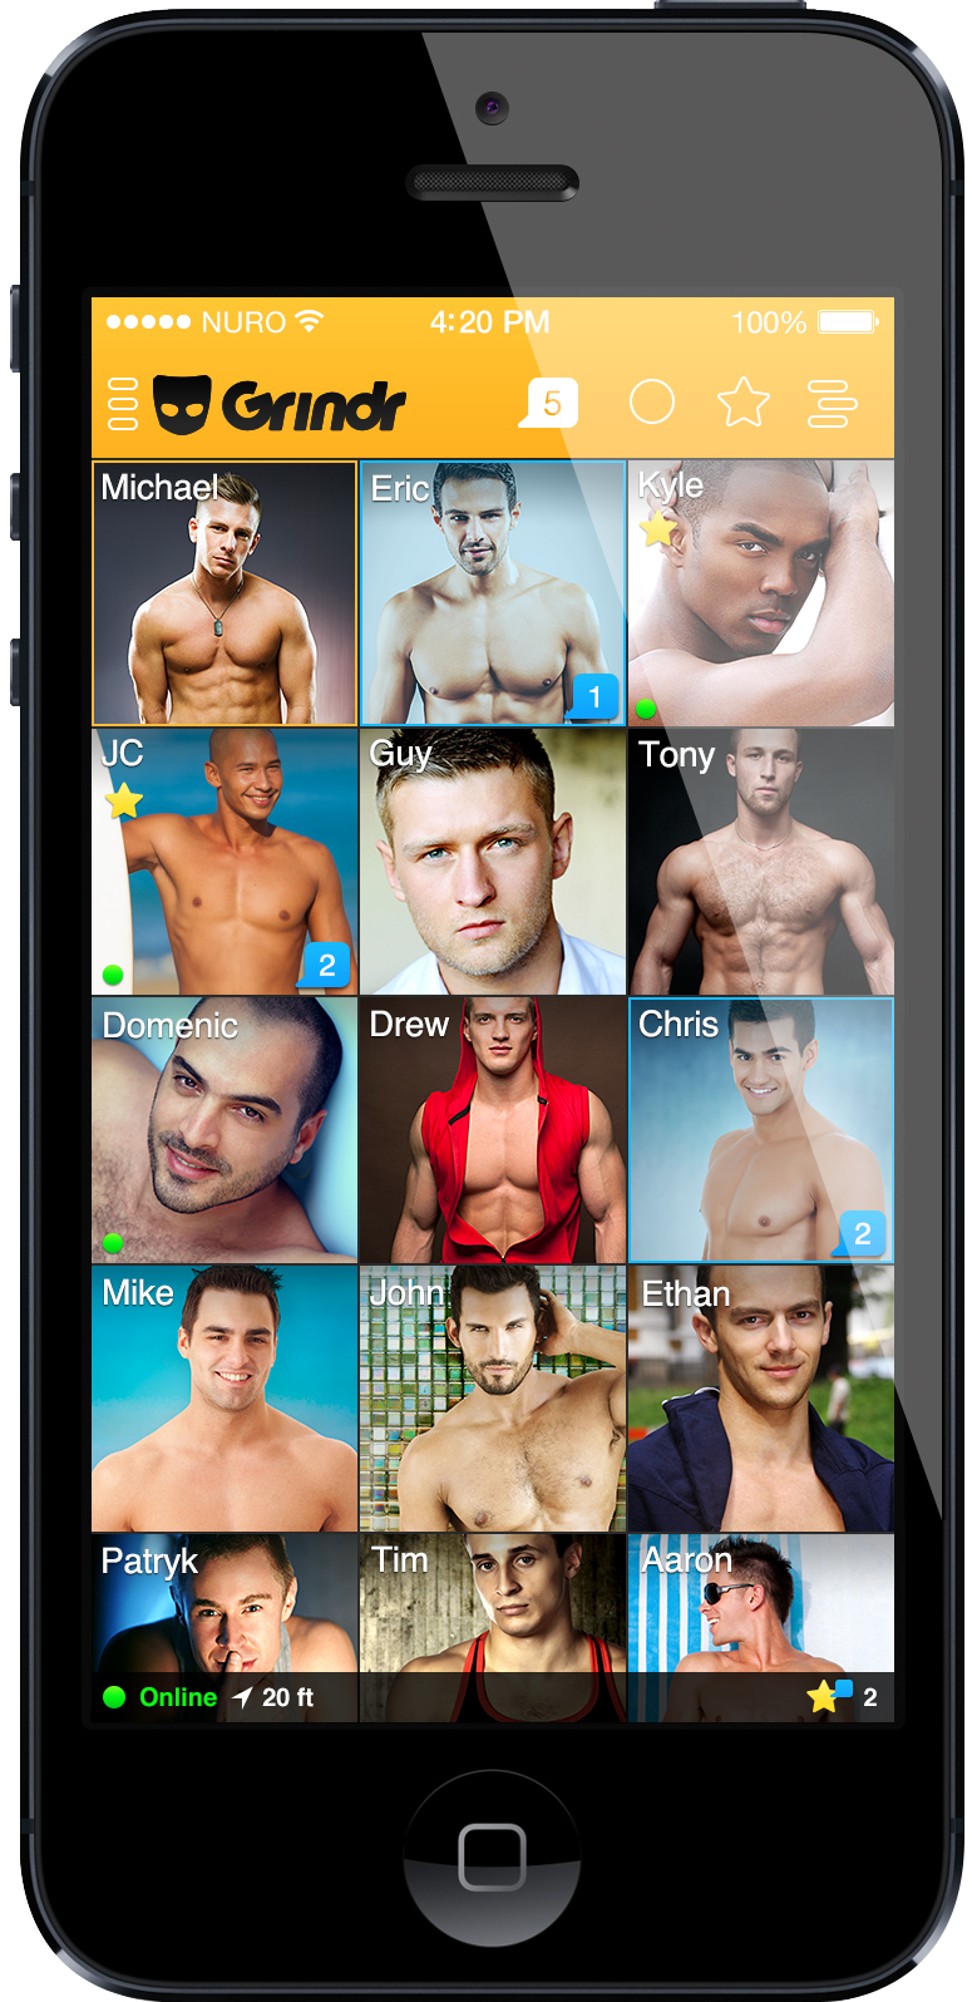 Gay dating app Grindr had an estimated 27 million users as of 2017. Photo: Handout